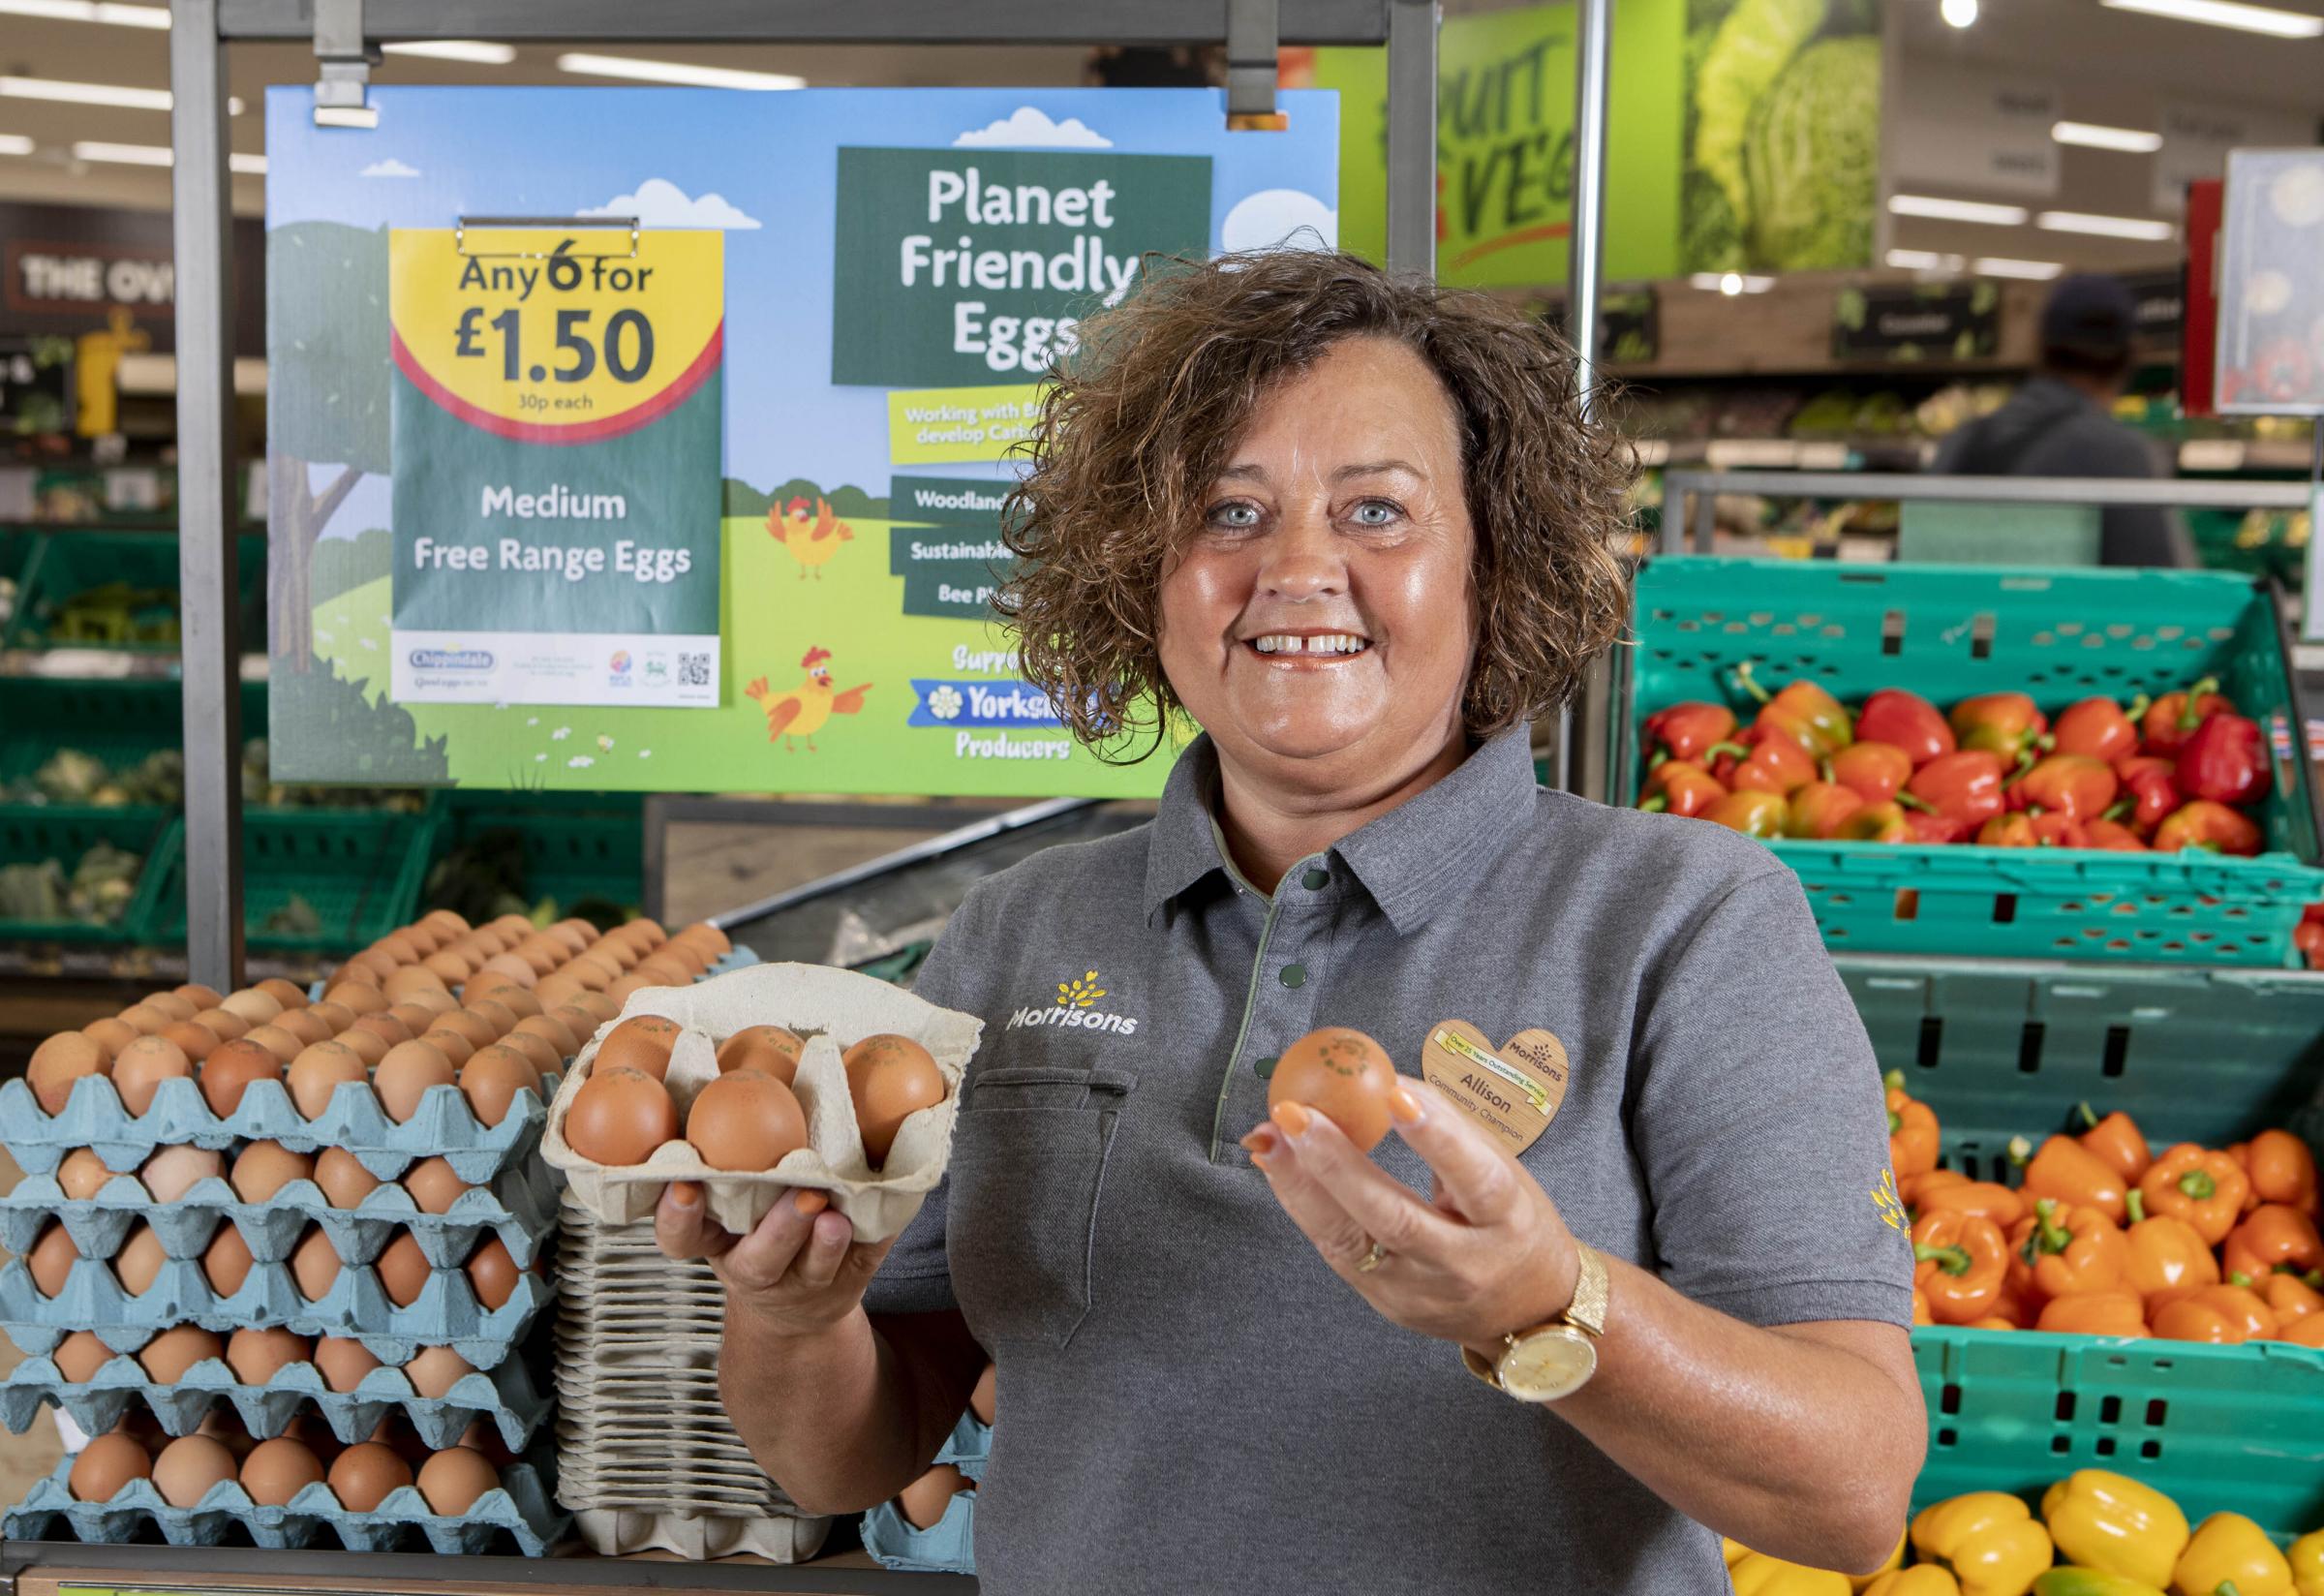 Little Clacton's Morrisons launches ‘carbon-neutral’ eggs from hens fed with insects